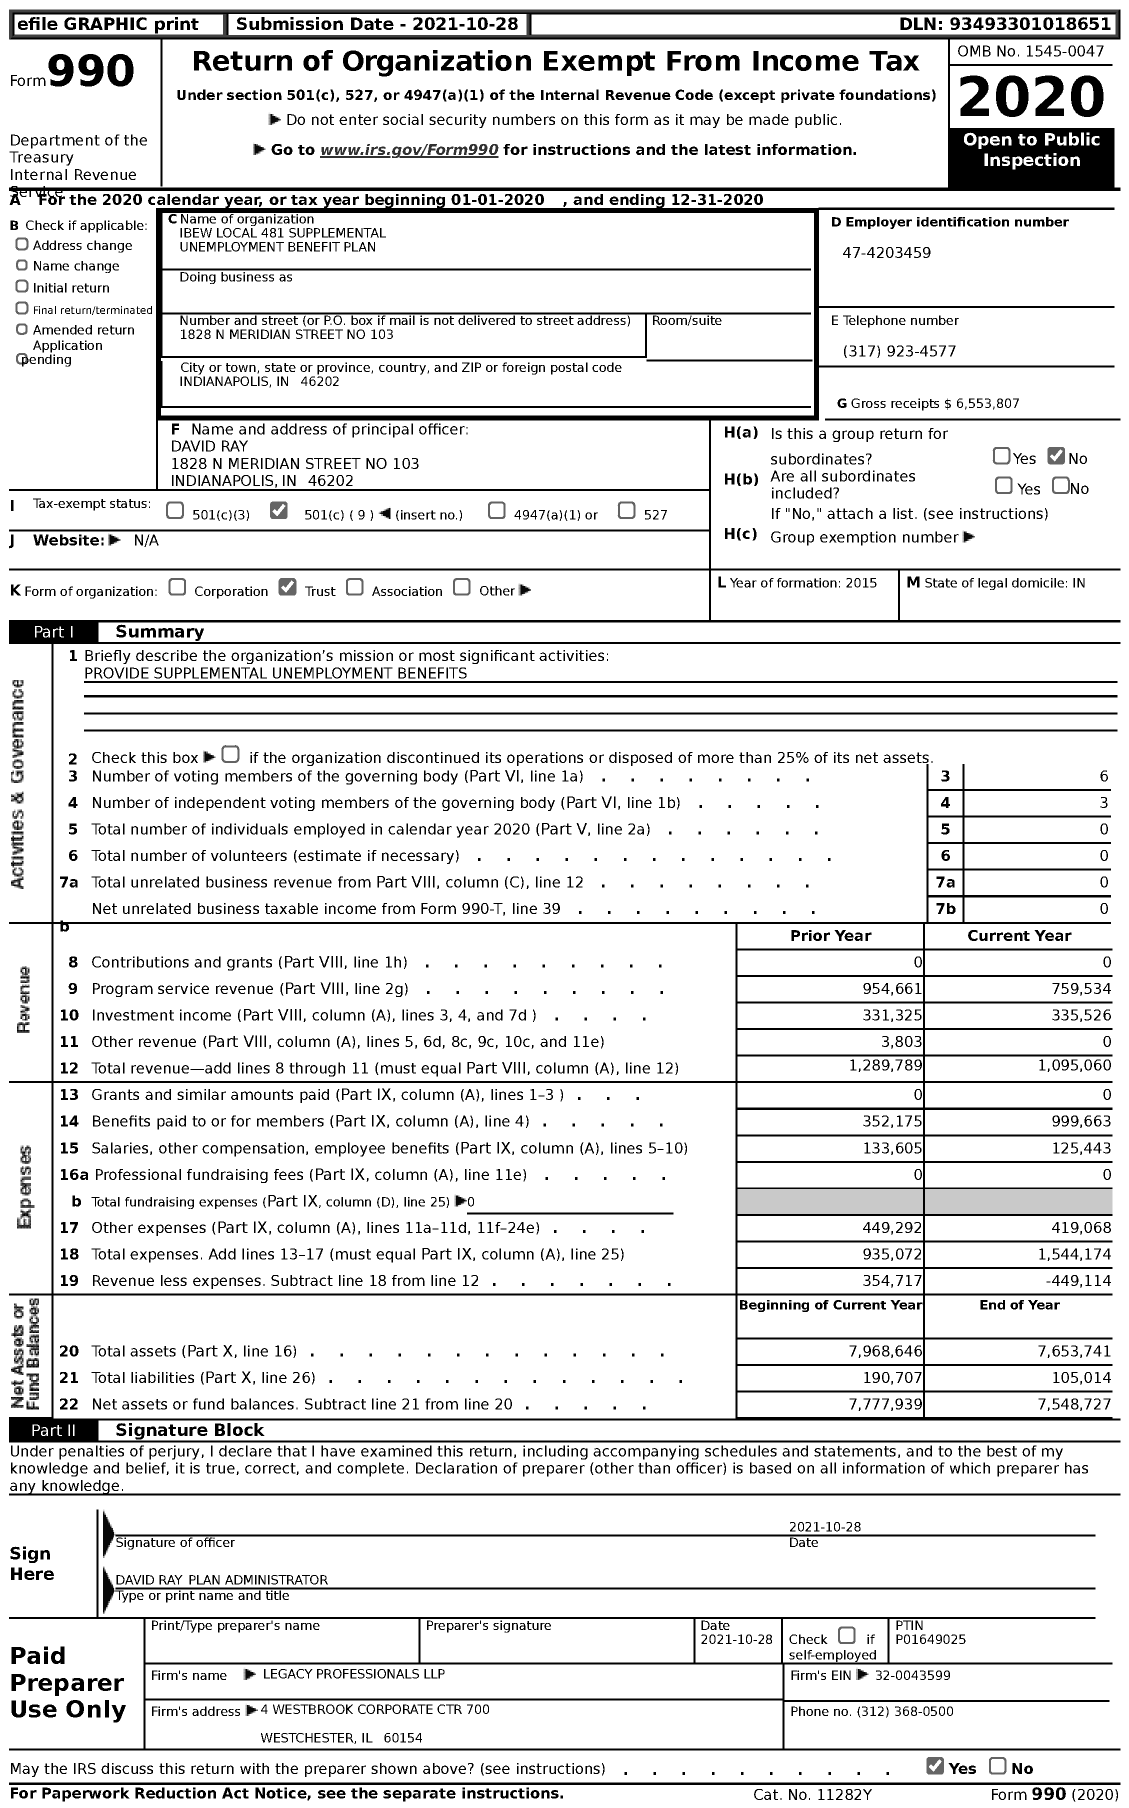 Image of first page of 2020 Form 990 for IBEW Local 481 Supplemental Unemployment Benefit Plan